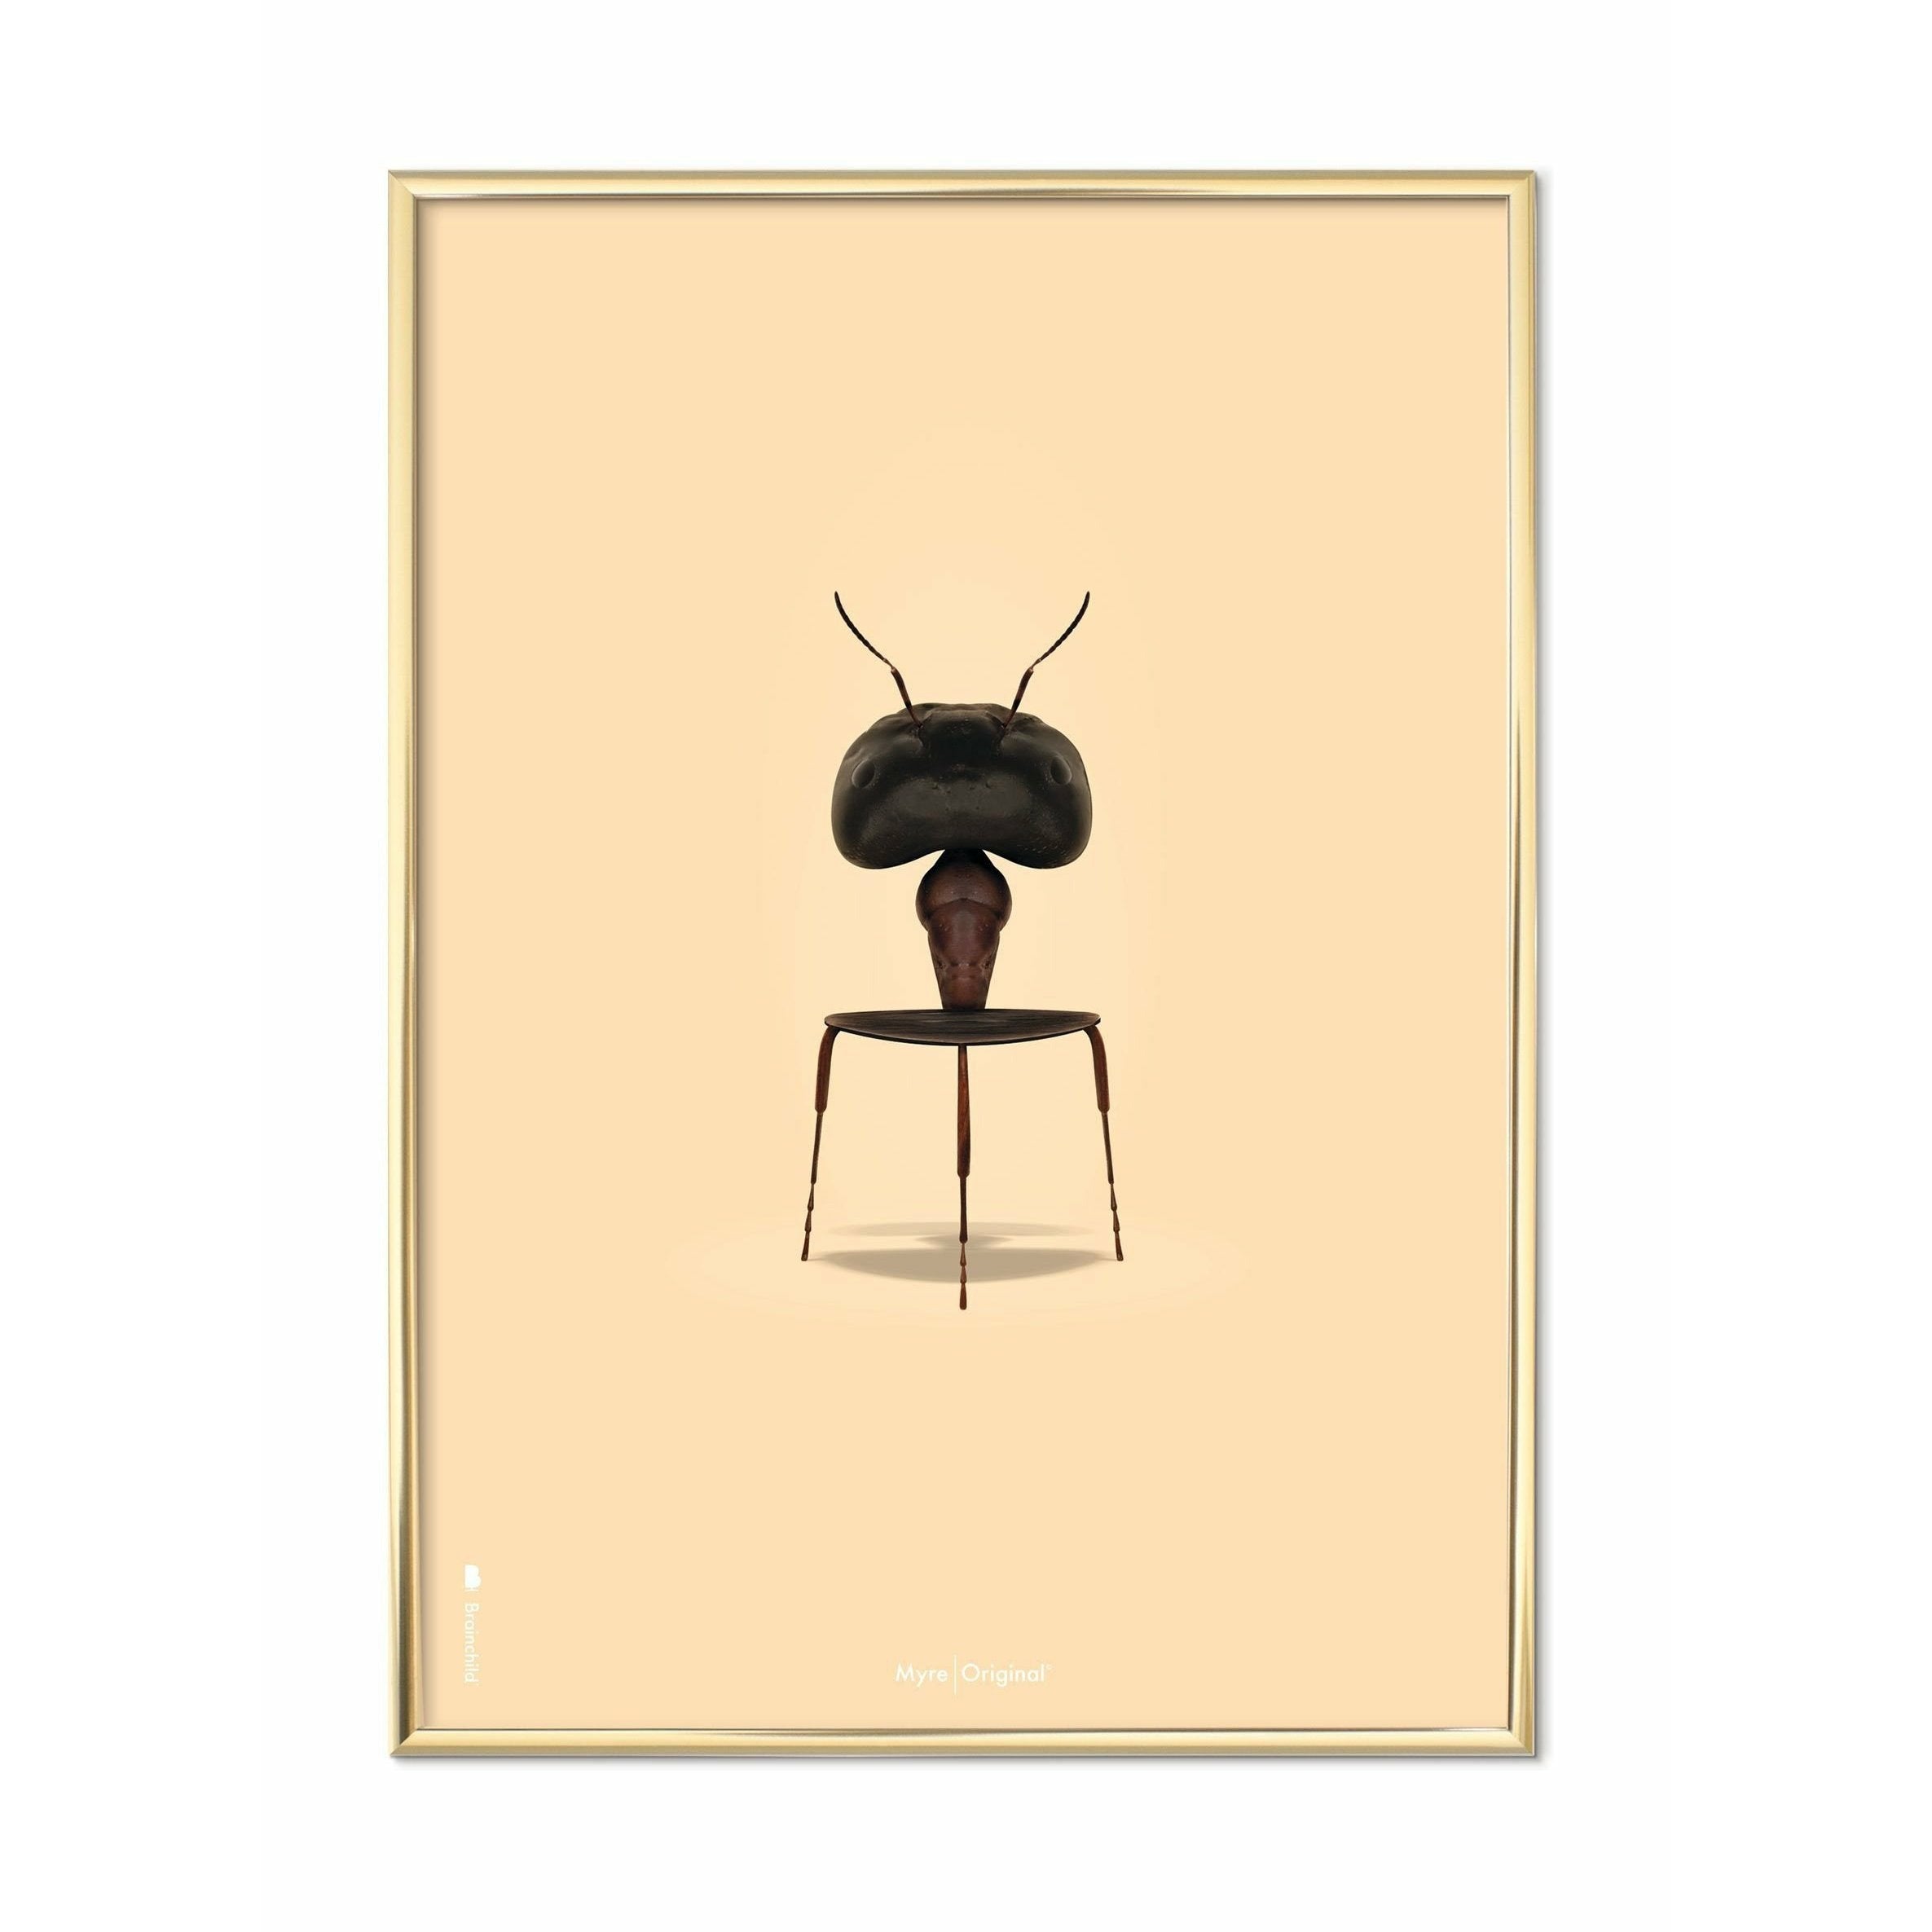 Brainchild Ant Classic Poster, Brass Colored Frame A5, Sand Color Background